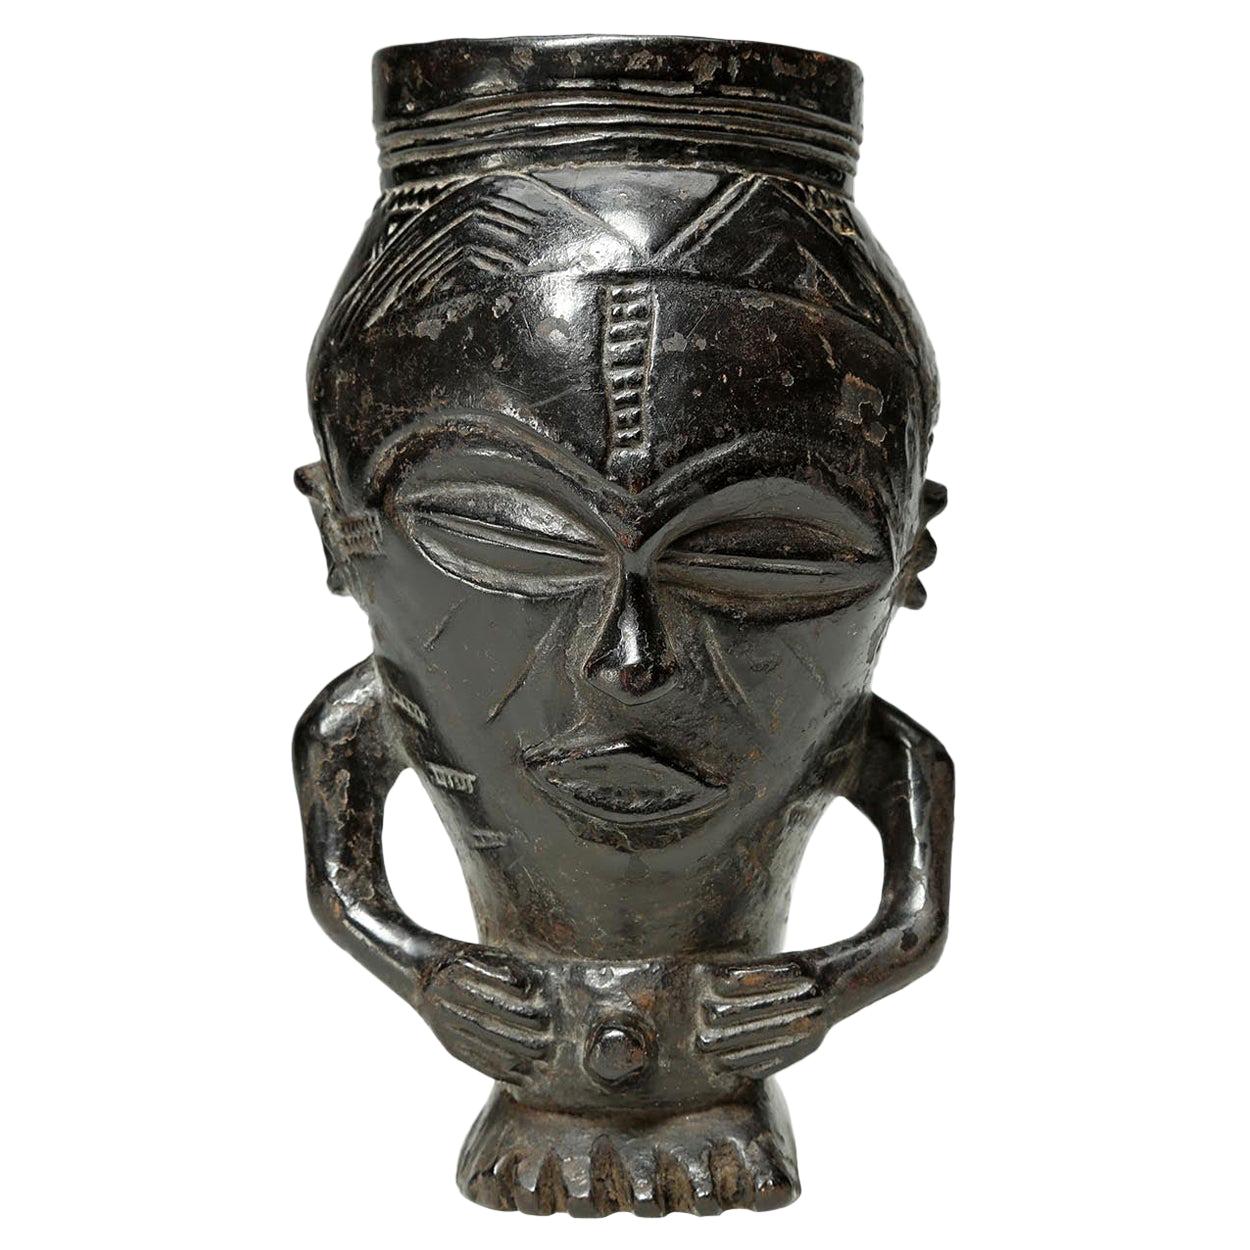 Early finely carved wood tribal Kuba figural cup, Congo with rich dark patina. In the form of a stylized figure with hands on stomach, ending on a foot. Deep patina from extensive use, early 20th century. Measures: Cup 8 x 4 1/2 x 4 1/2 inches. Kuba